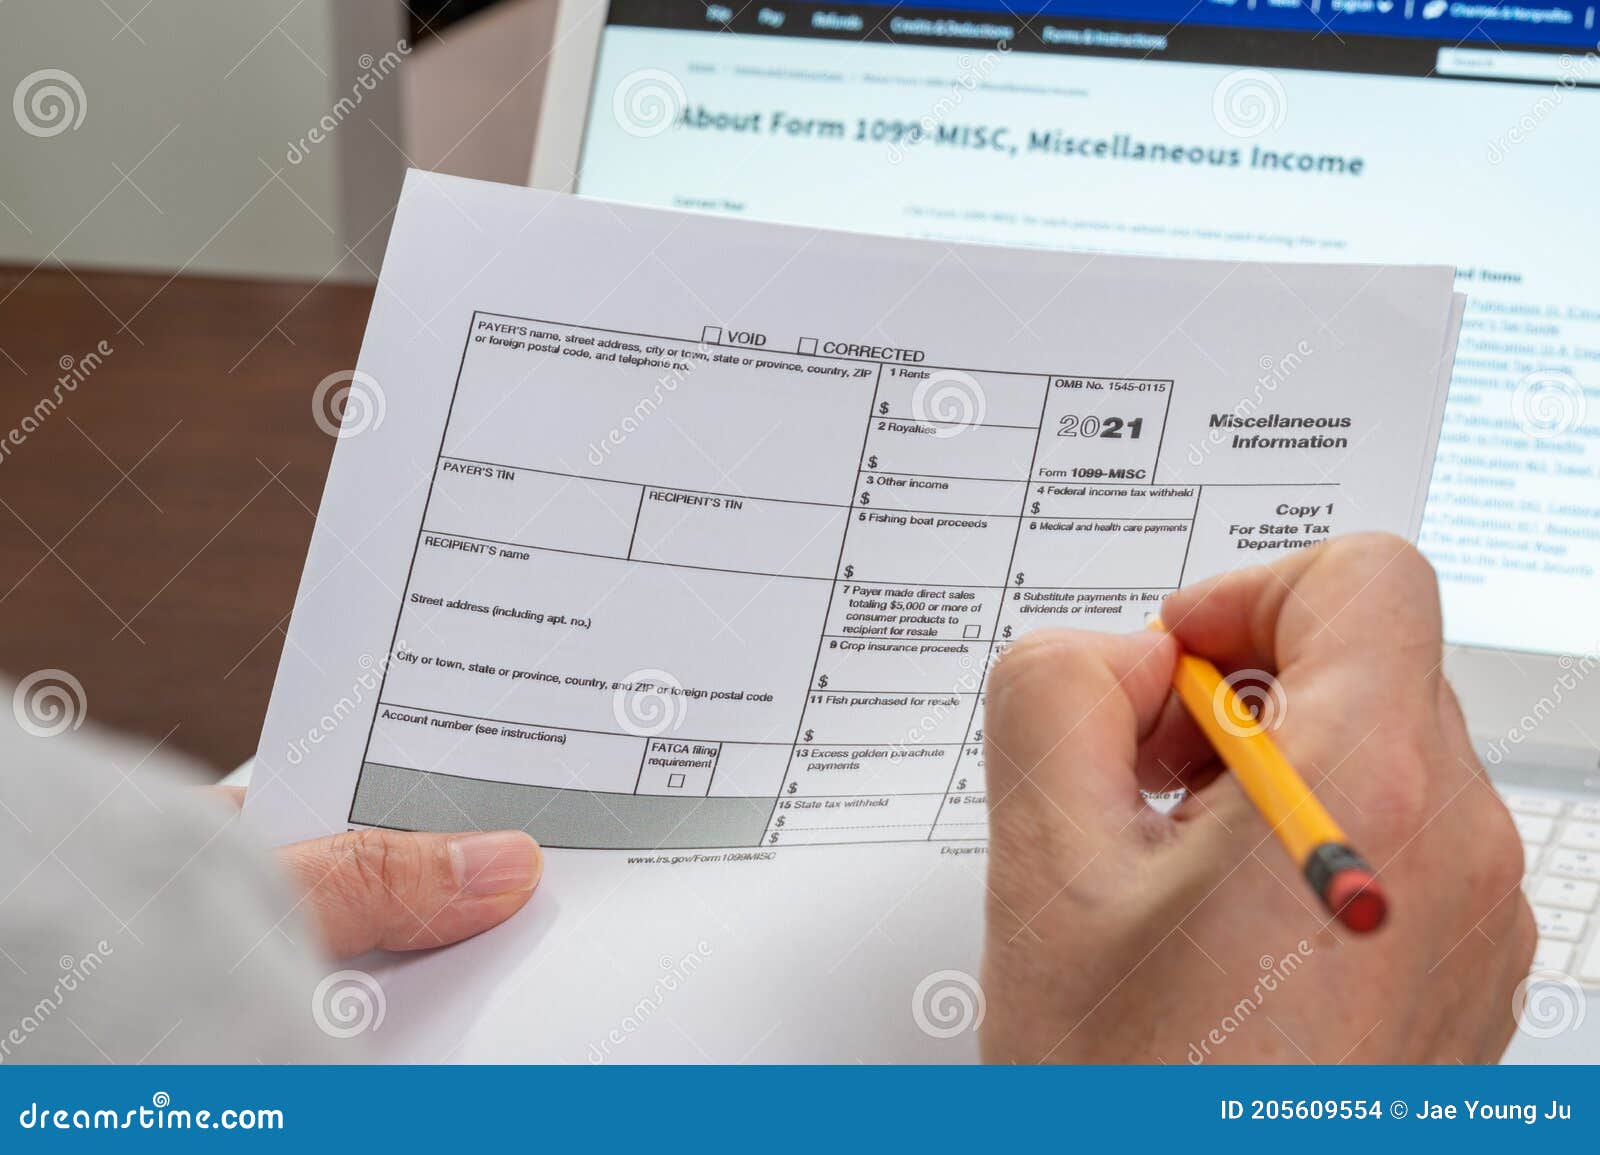 the hand of the man holding the tax form 1099-misc